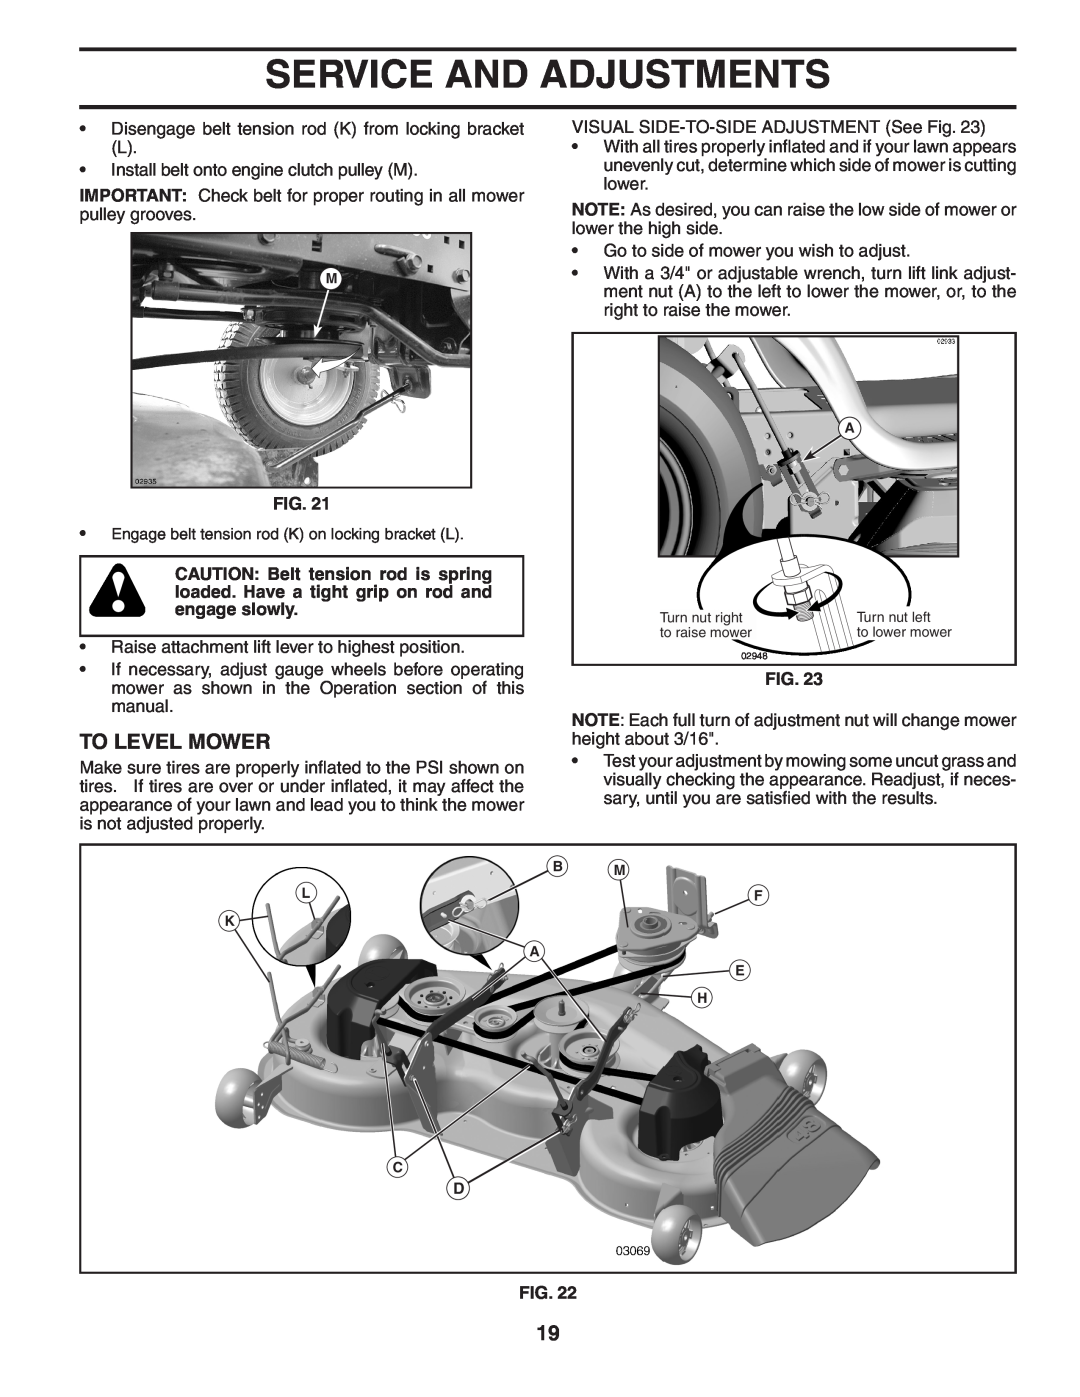 Poulan XT22H48YT manual To Level Mower, Service And Adjustments 